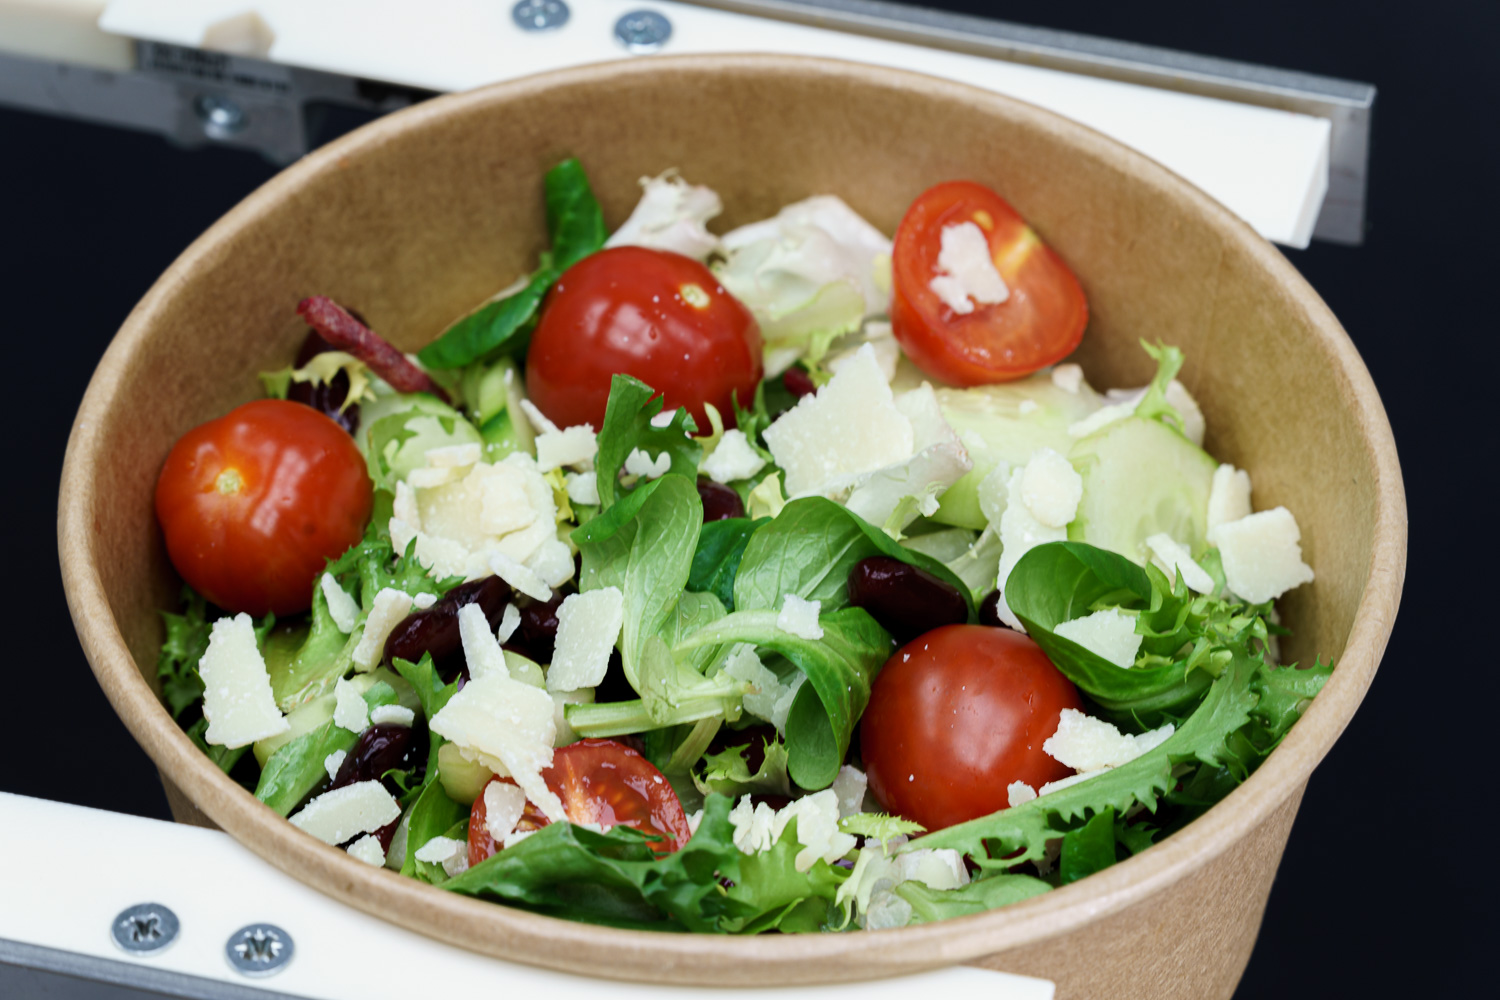 Green salad with cherry tomatoes and parmesan